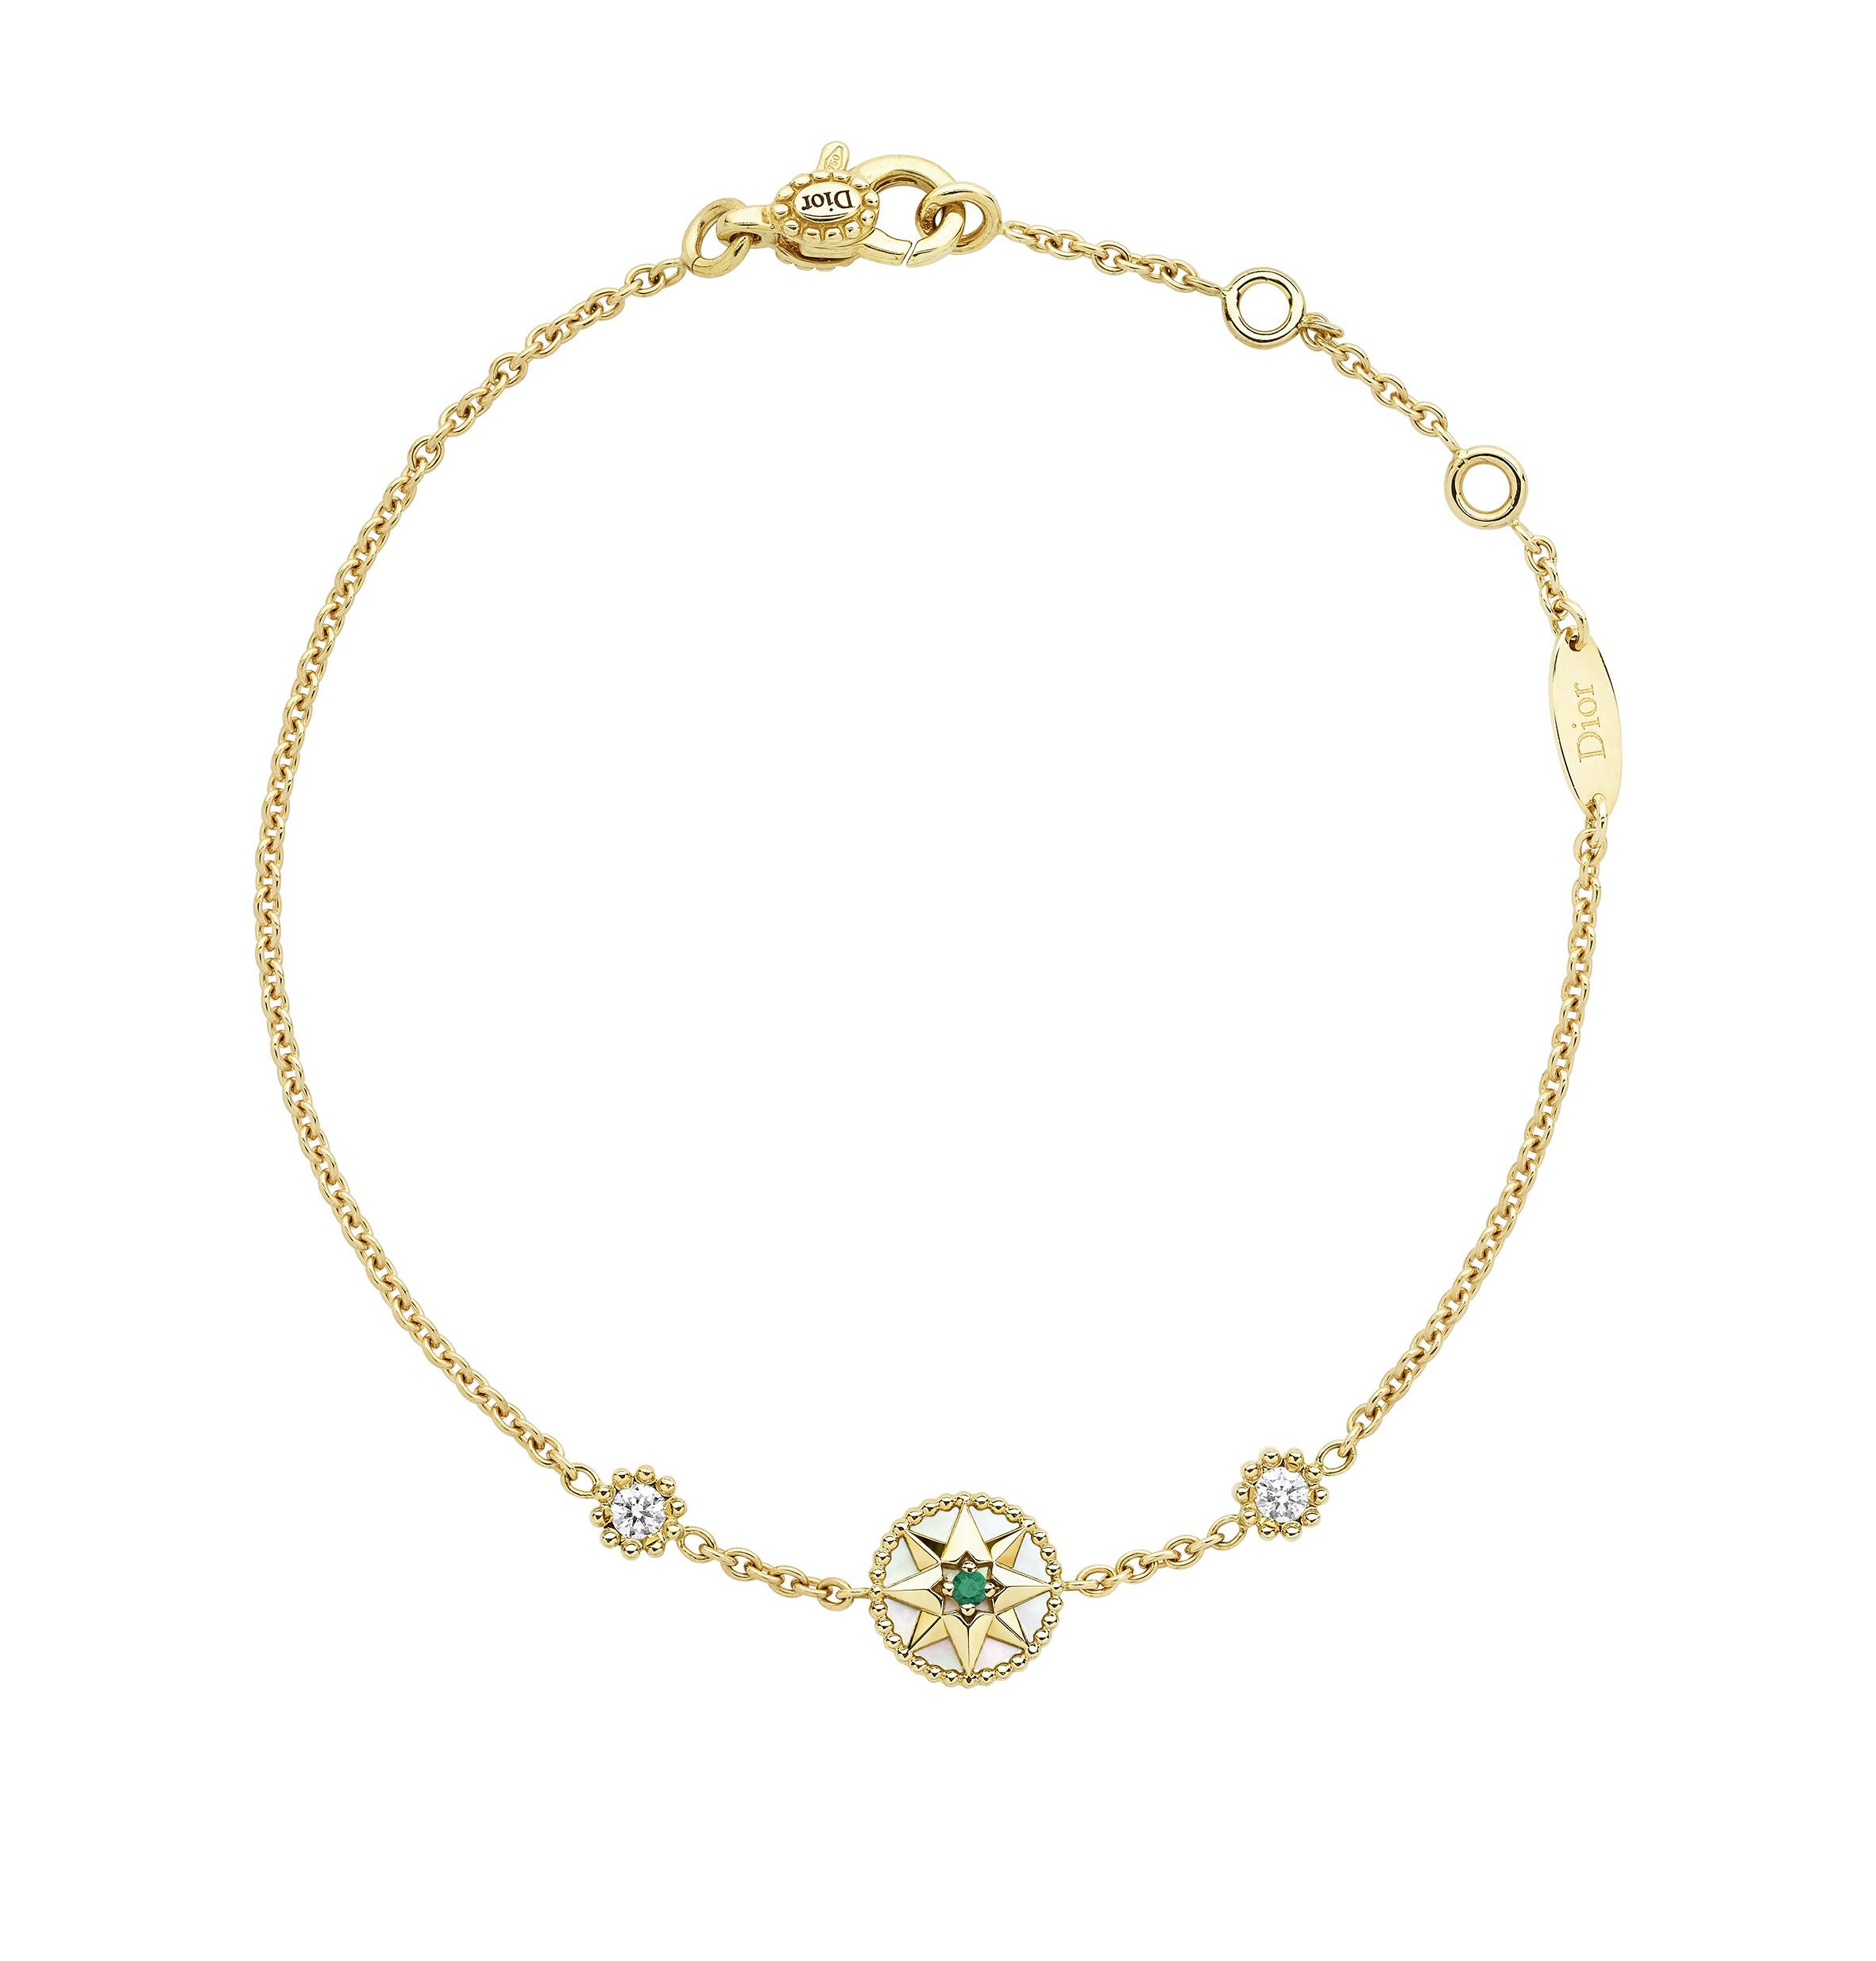 ROSE DES VENTS BRACELET Yellow Gold with Diamonds and an Emerald $17,300